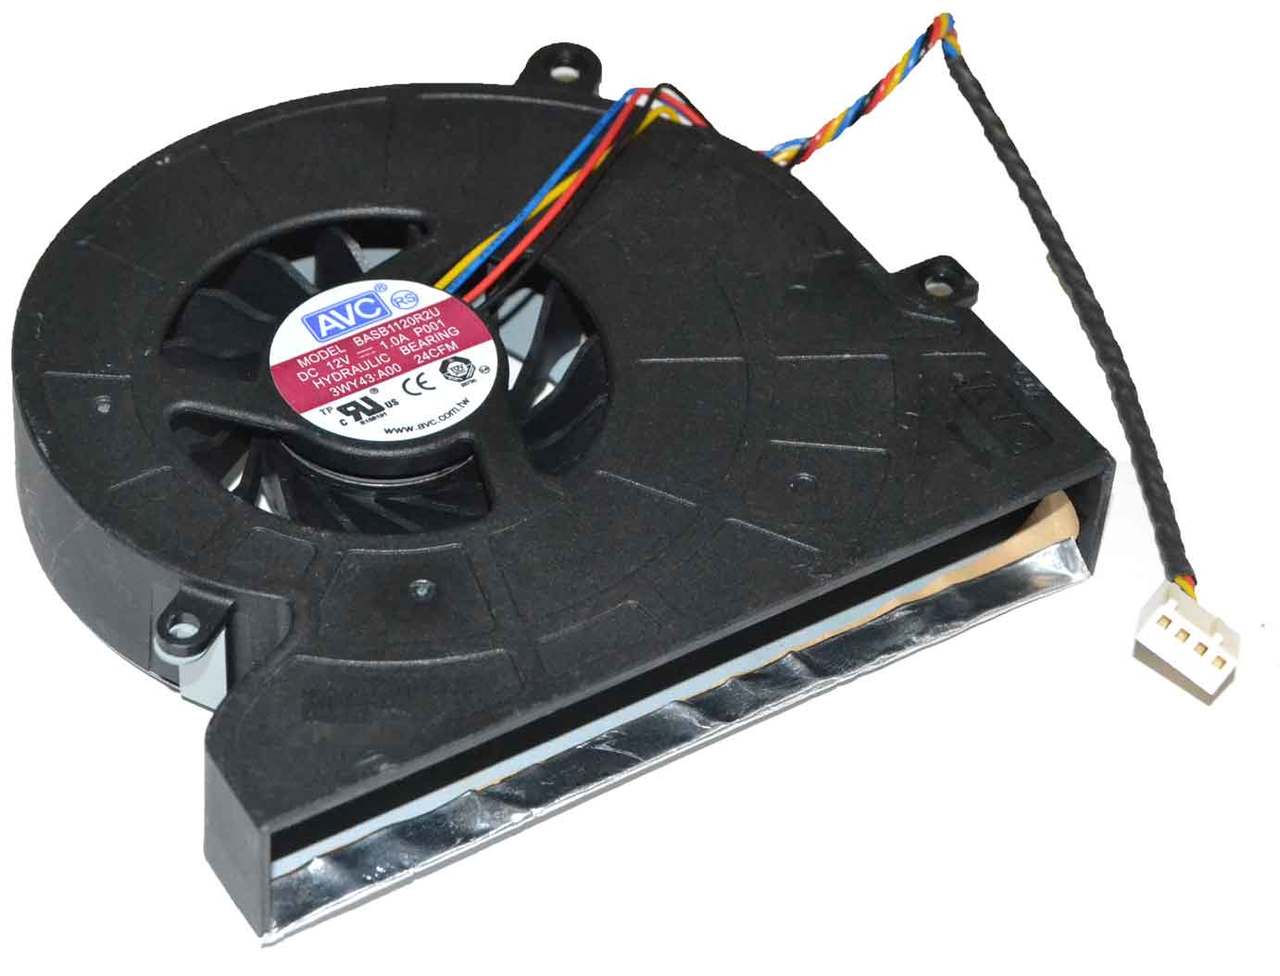 Dell 3wy43 Cpu Cooling Fan For Inspiron One 23 2330 3048 Optiplex 9010 90 Aio Vostro 360 Cpu Medics